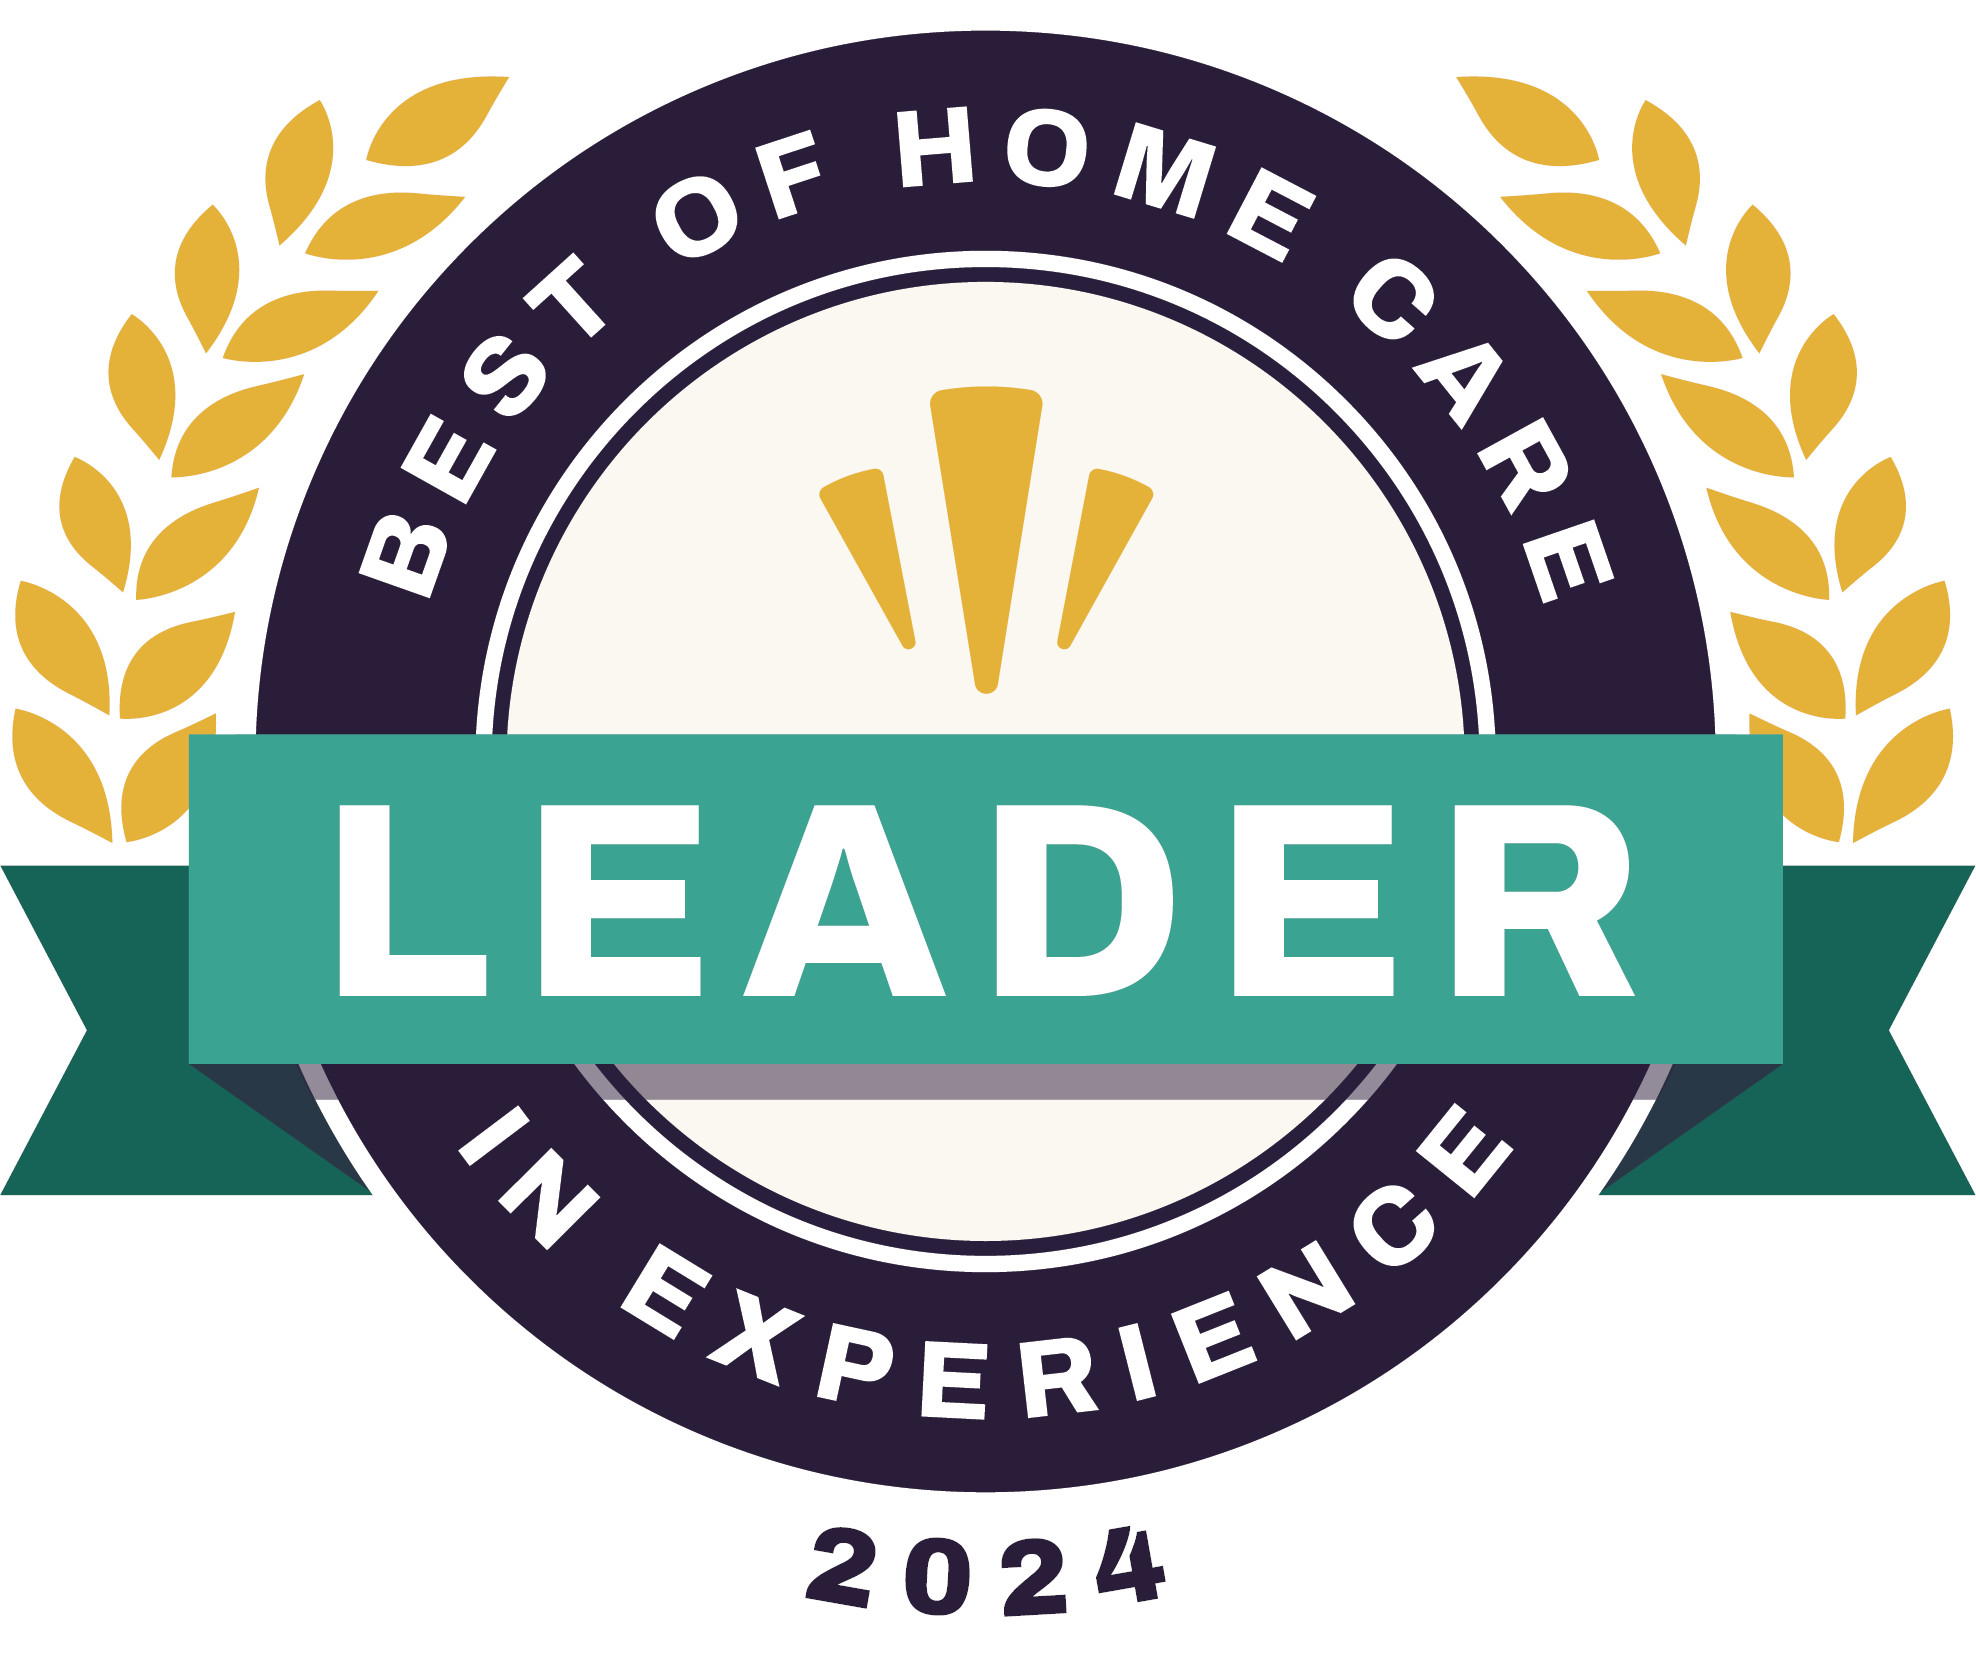 The highest recognition based on satisfaction scores a home care agency can earn, "Leader in Excellence" means best-in-class ratings from clients and caregivers. Leaders in Excellence award winners must also qualify for Provider of Choice and Employer of Choice awards.